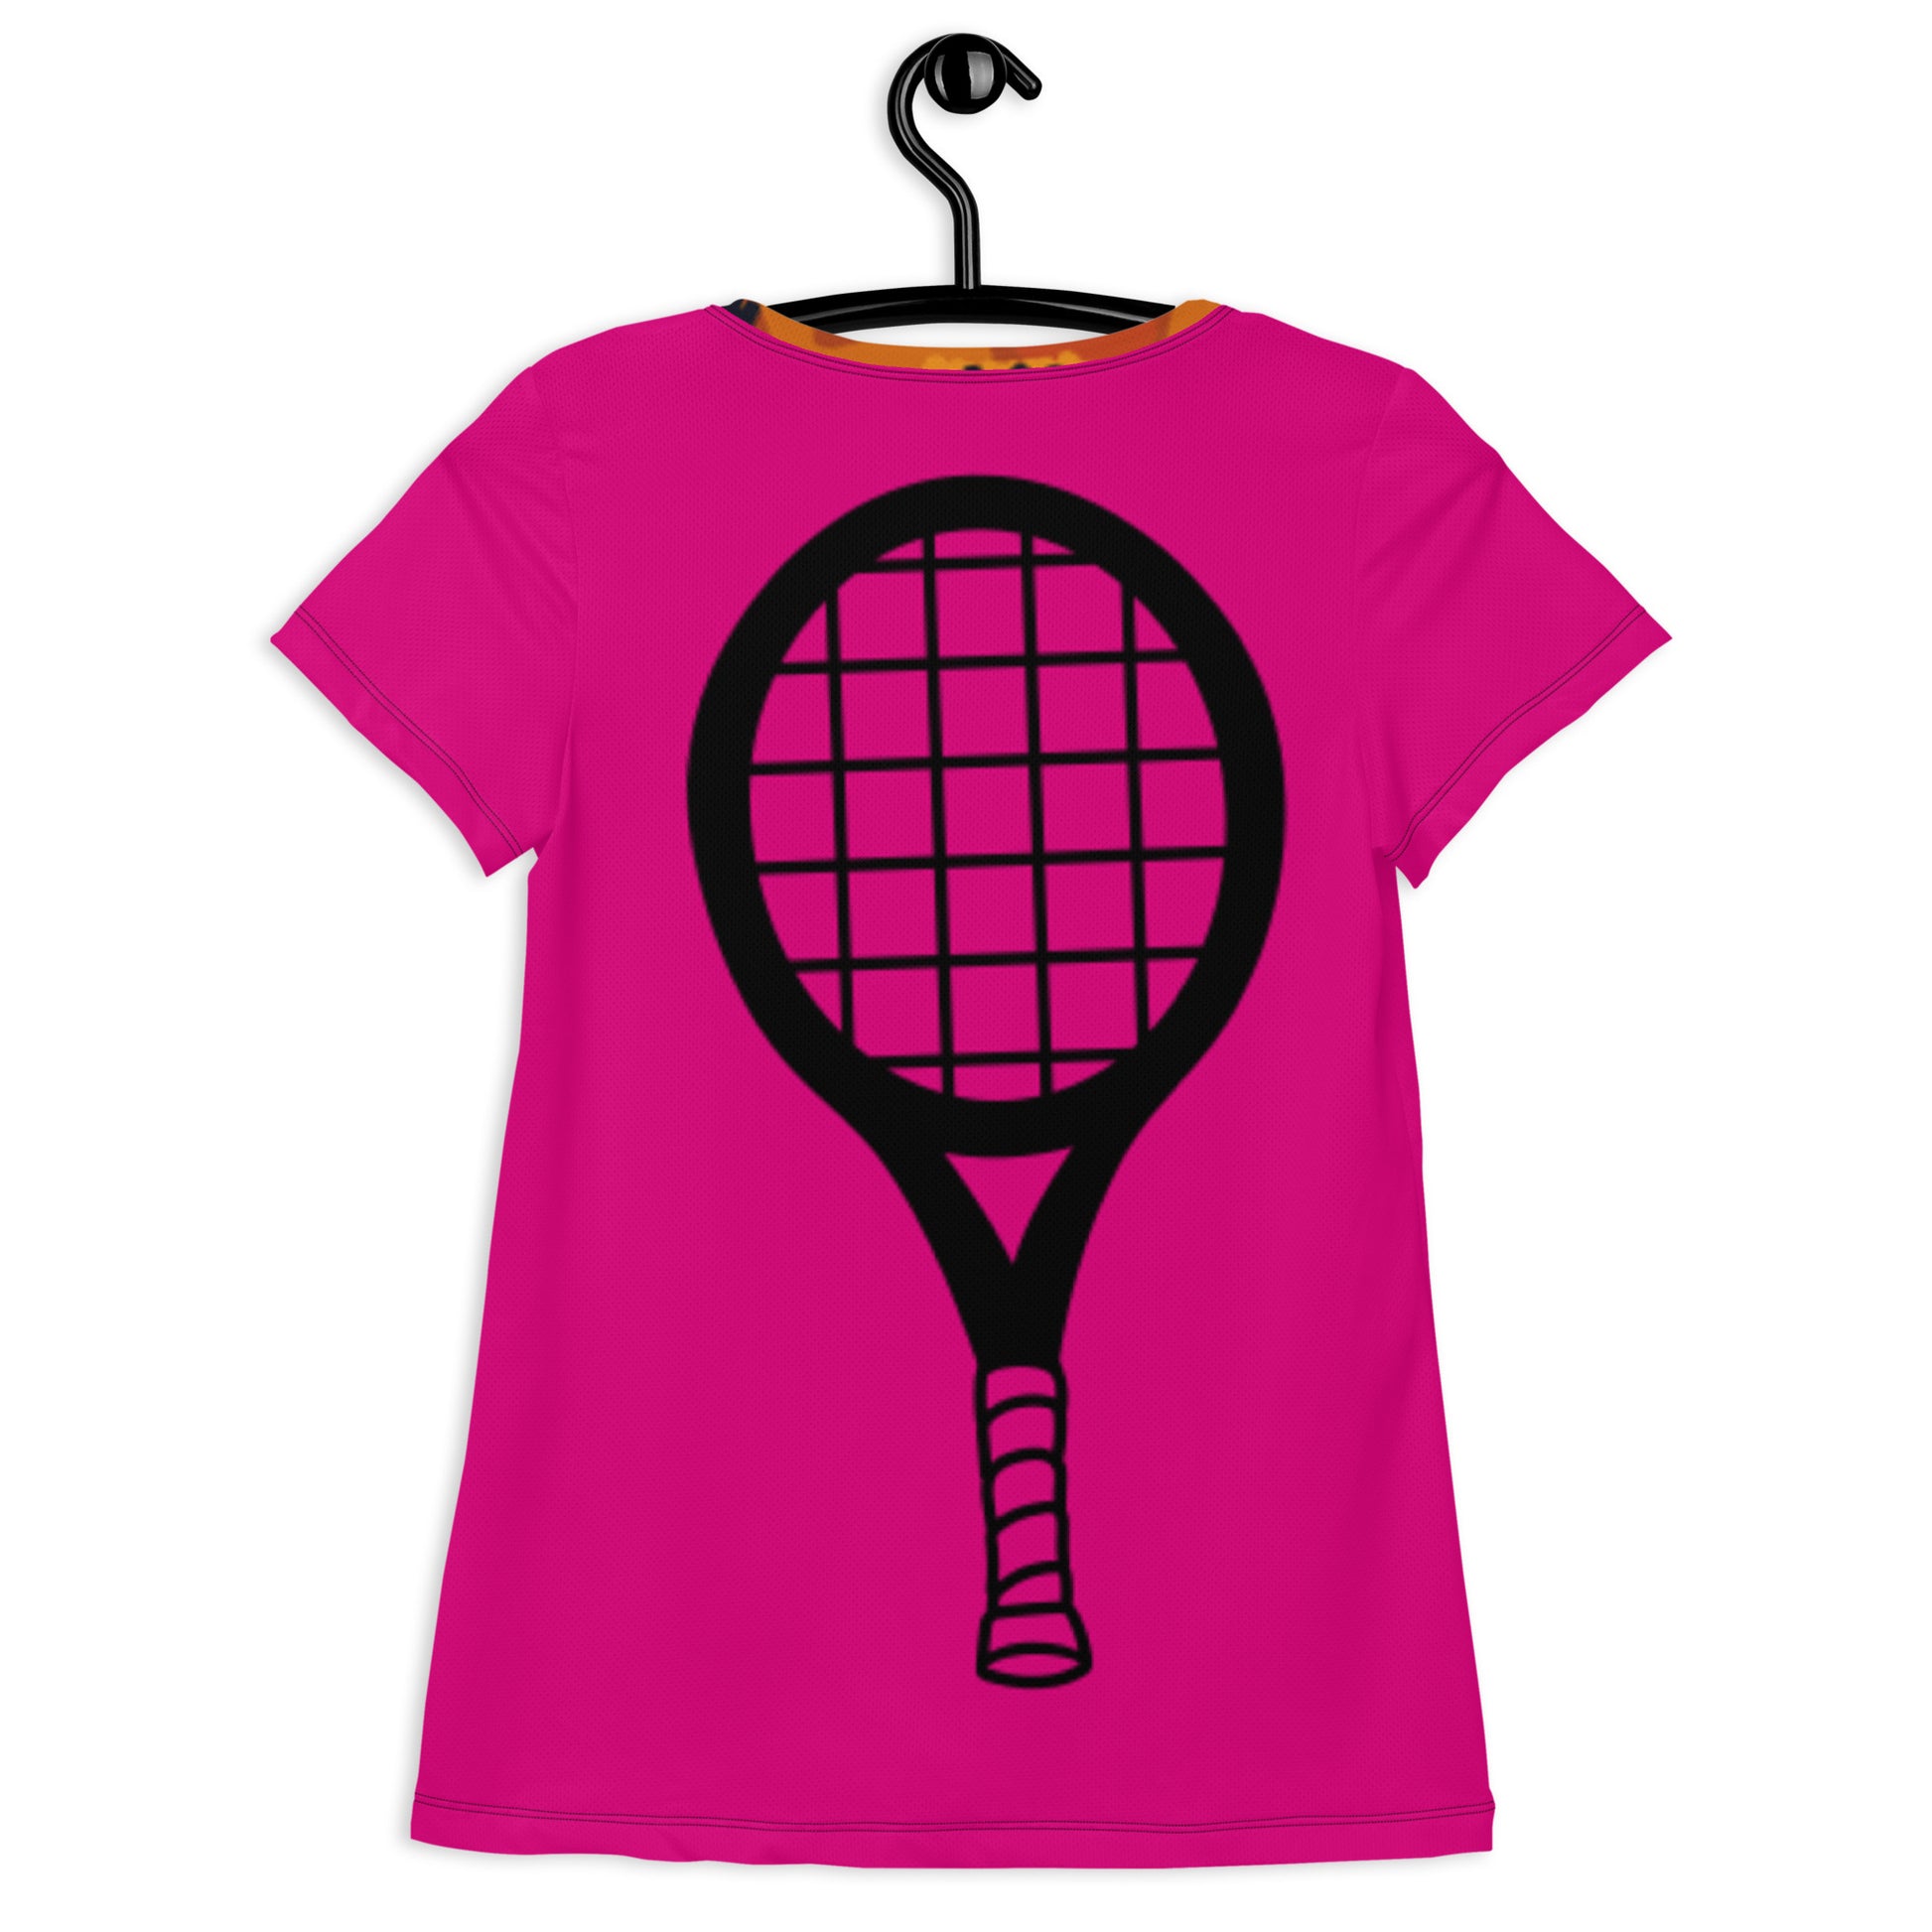 Athletic Top for Tennis or Pickle Ball - DMD Bags